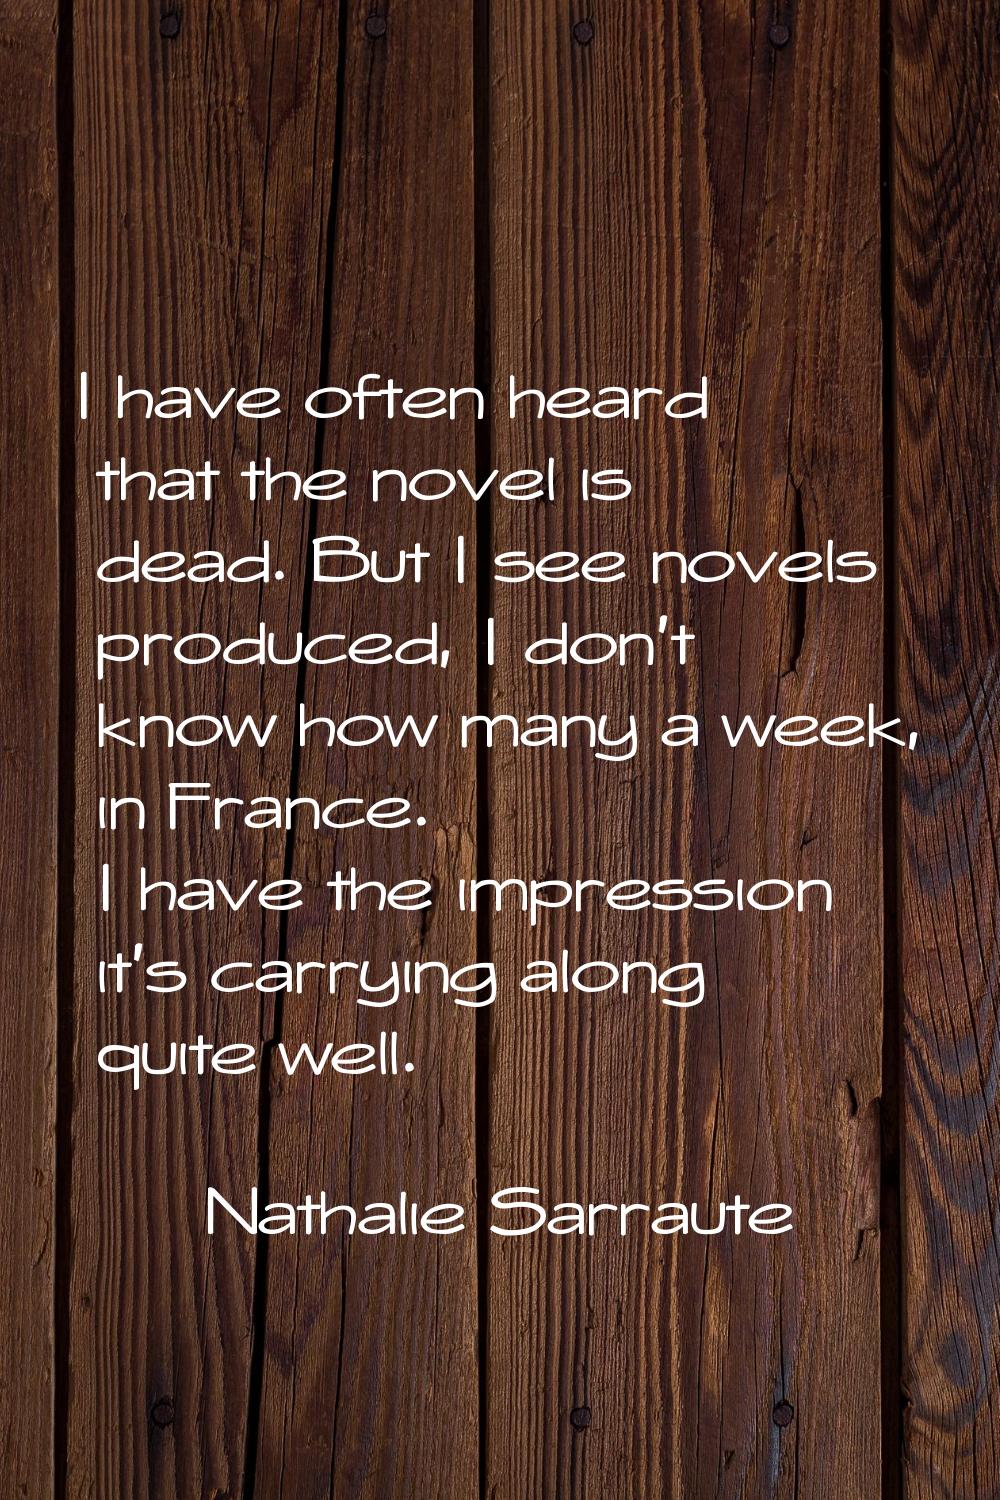 I have often heard that the novel is dead. But I see novels produced, I don't know how many a week,